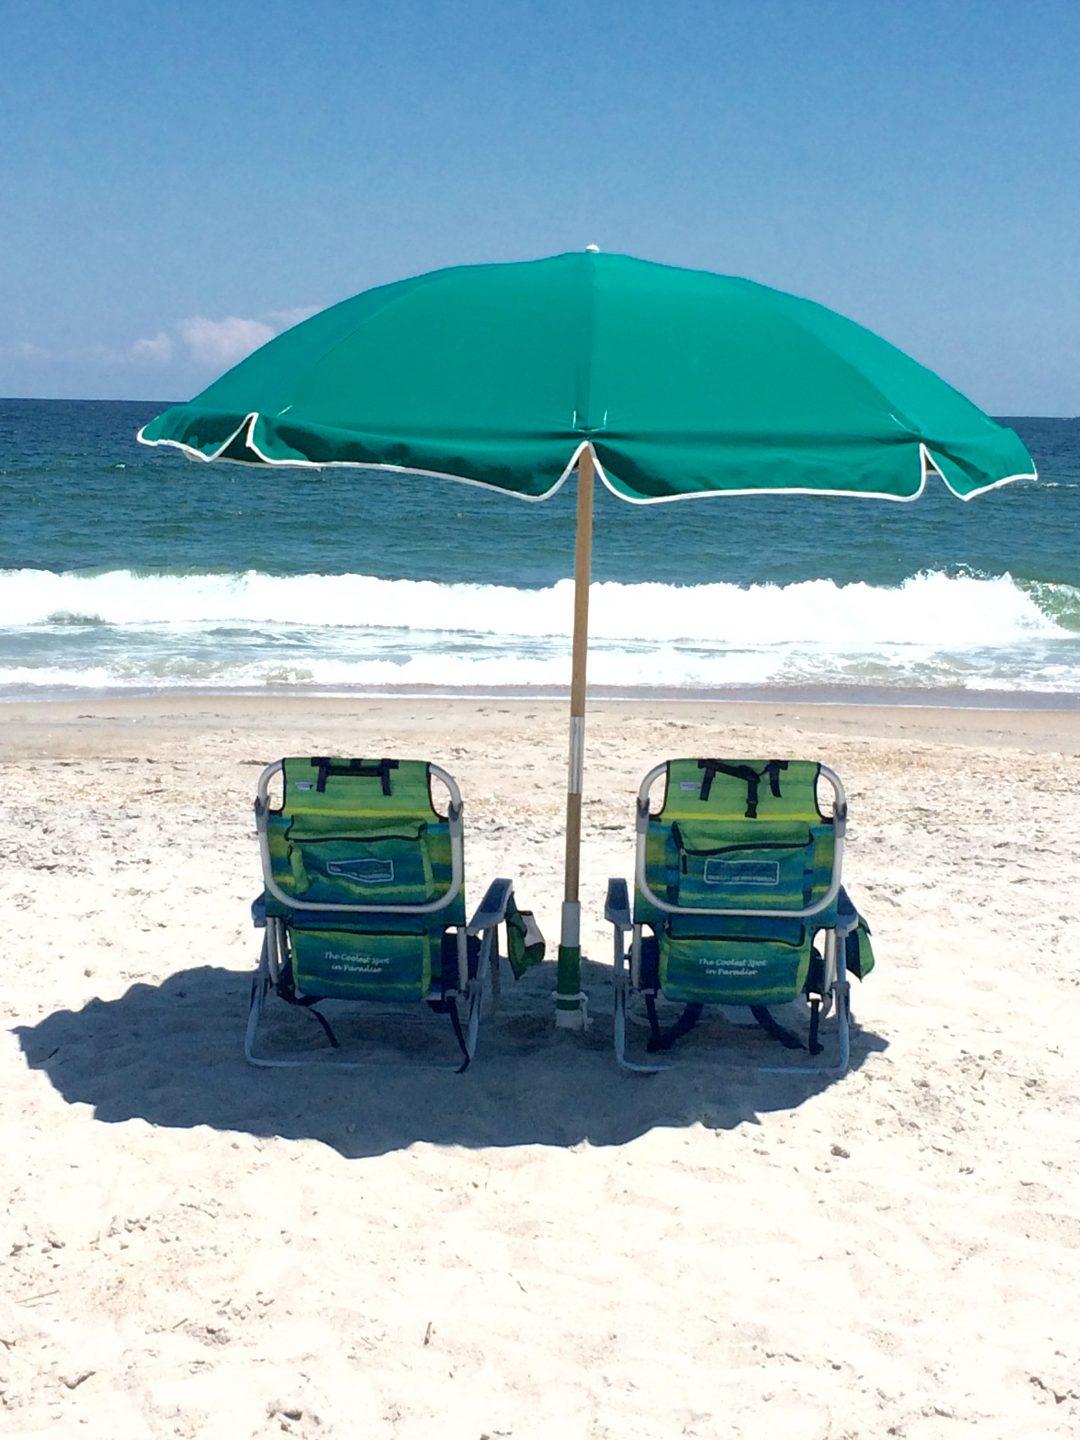 Creatice Holden Beach Chair And Umbrella Rentals for Simple Design